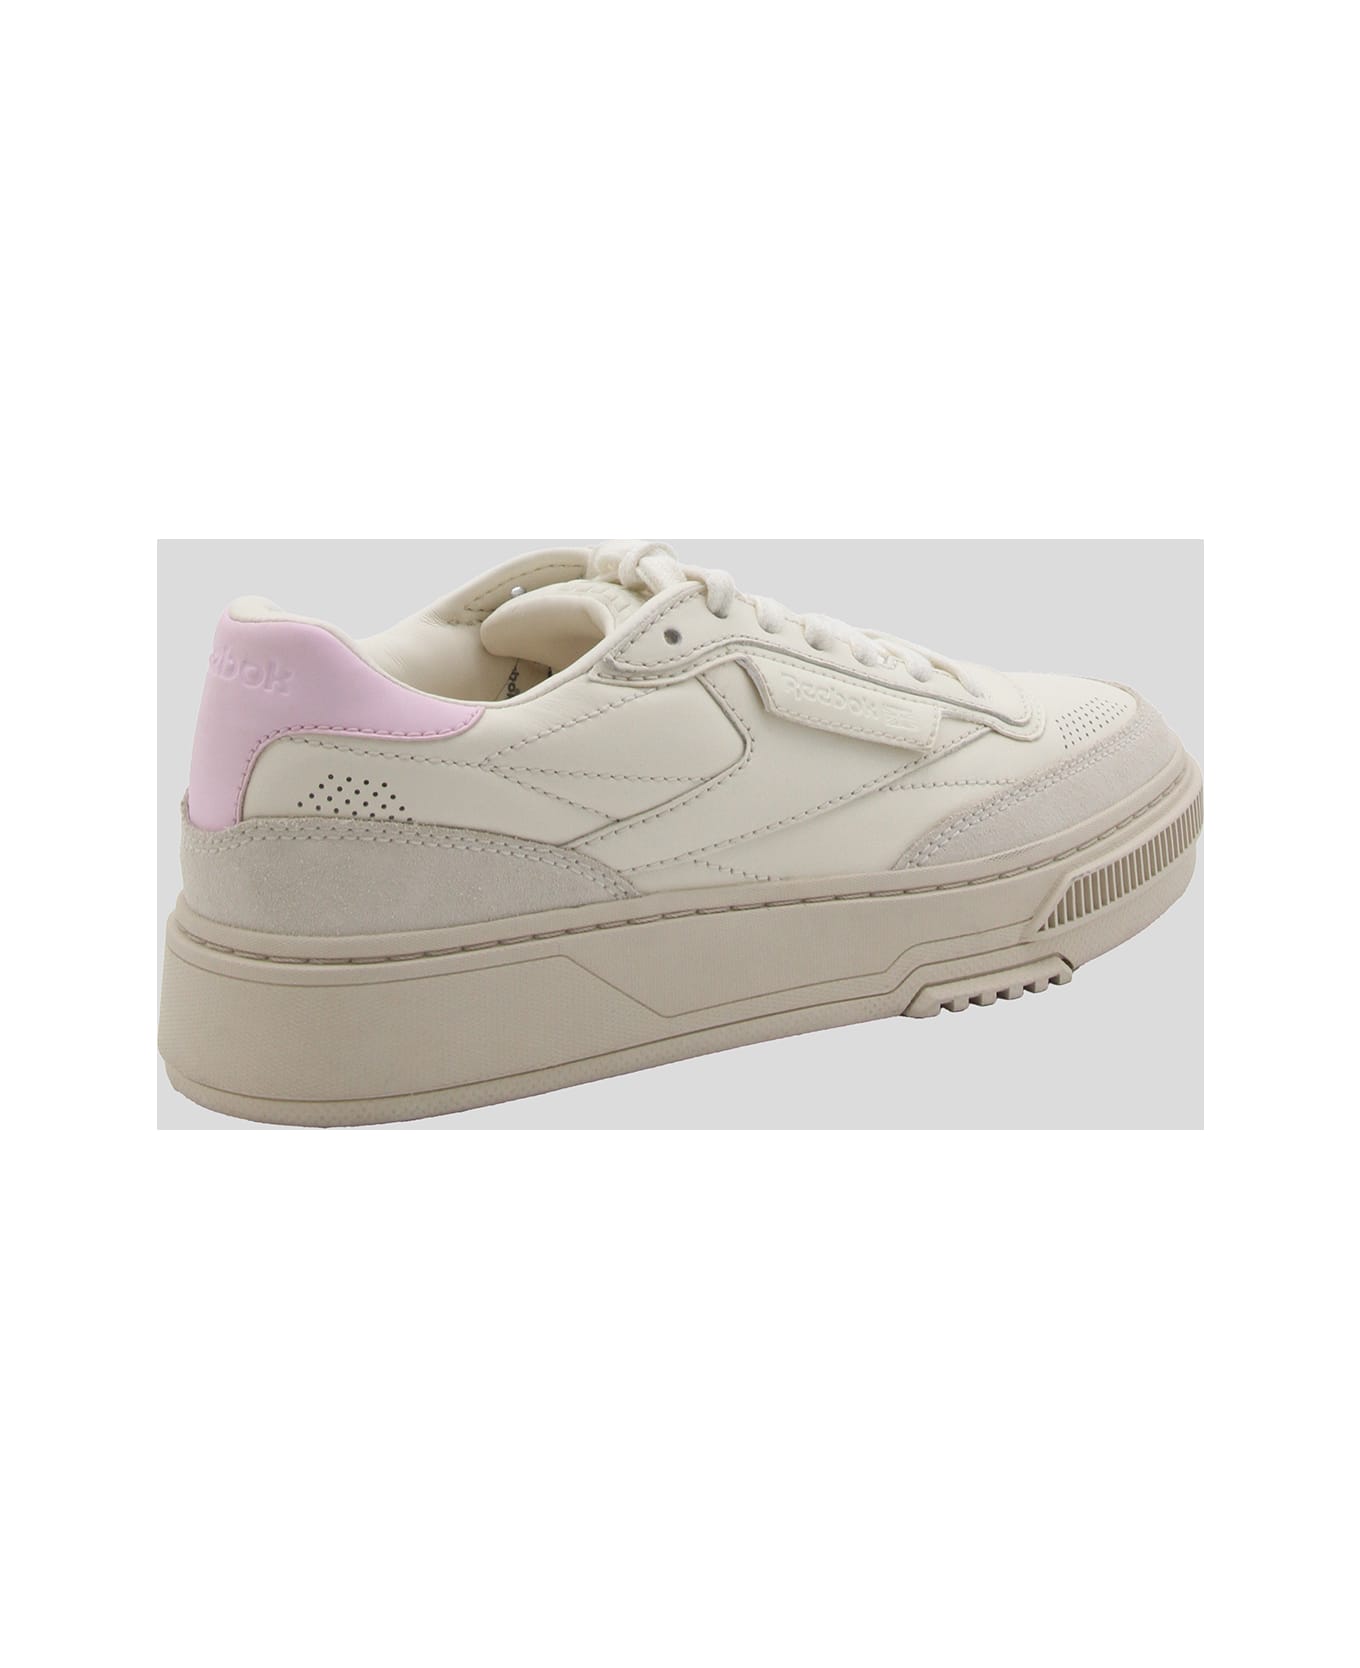 Reebok White And Pink Leather C Ltd Sneakers - WHITE/PINK